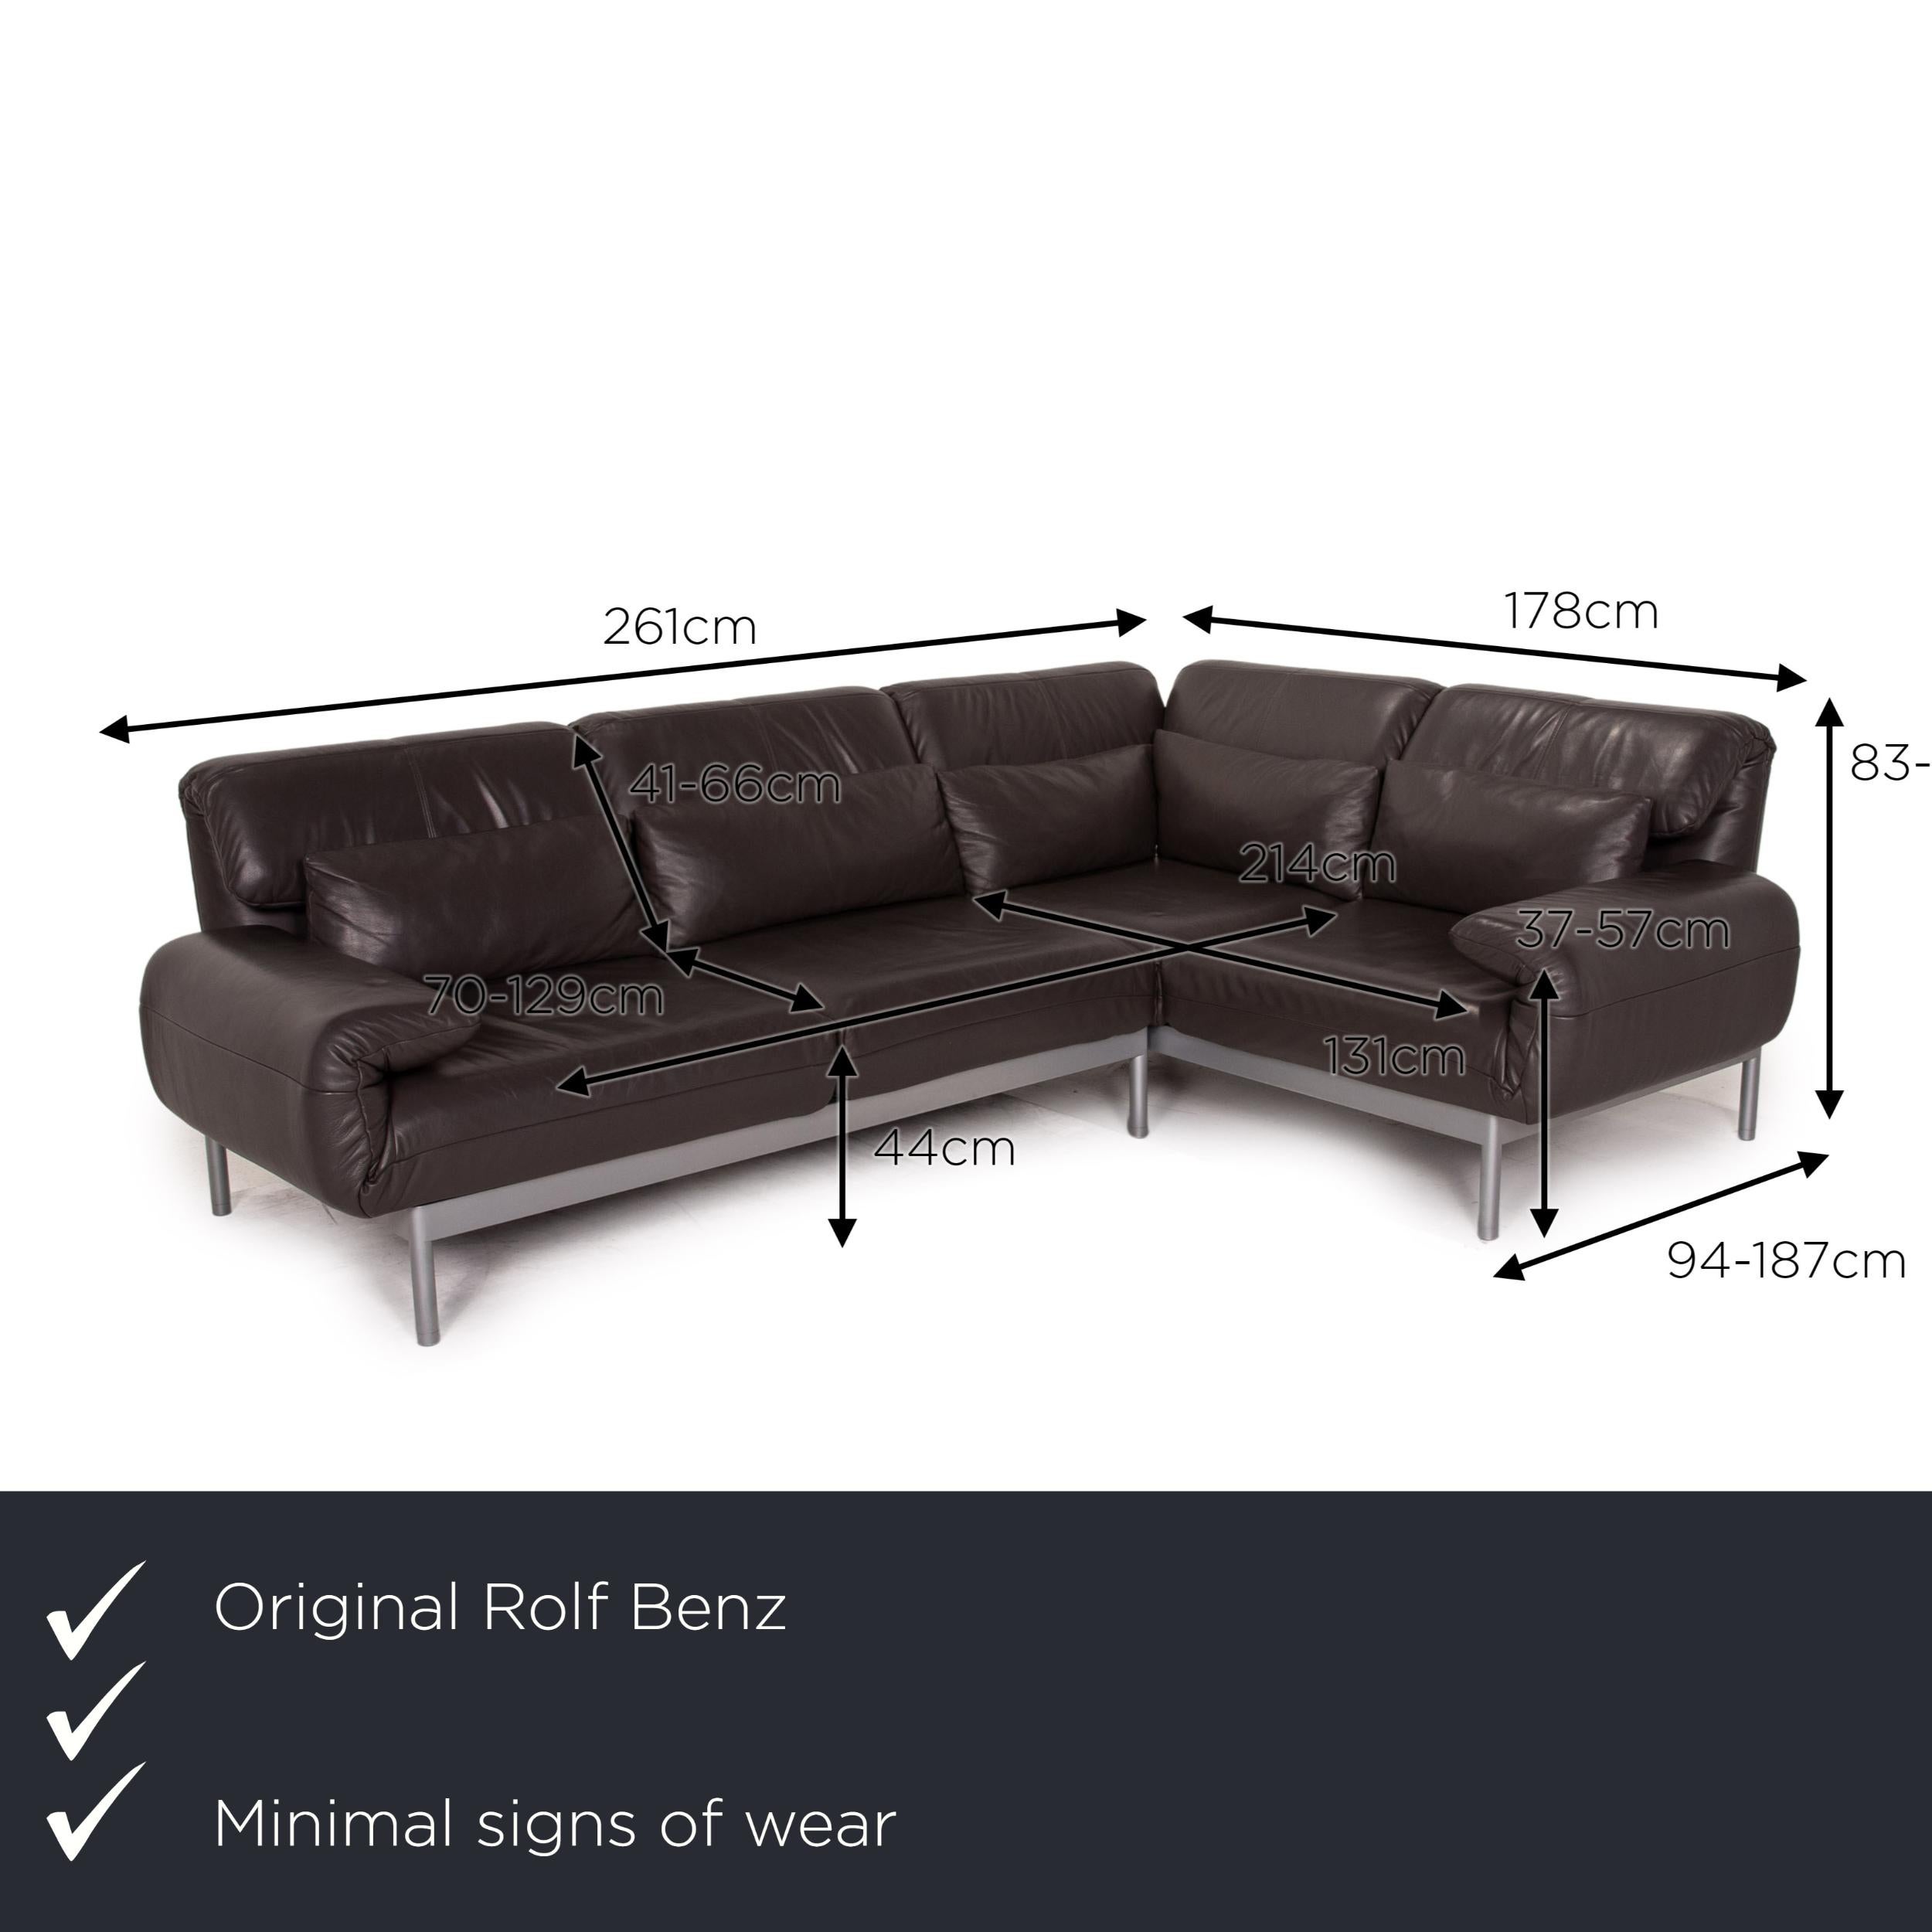 We present to you a Rolf Benz Plura leather corner sofa brown dark brown function relax function.
 

 Product measurements in centimeters:
 

Depth: 94
Width: 261
Height: 83
Seat height: 44
Rest height: 37
Seat depth: 70
Seat width: